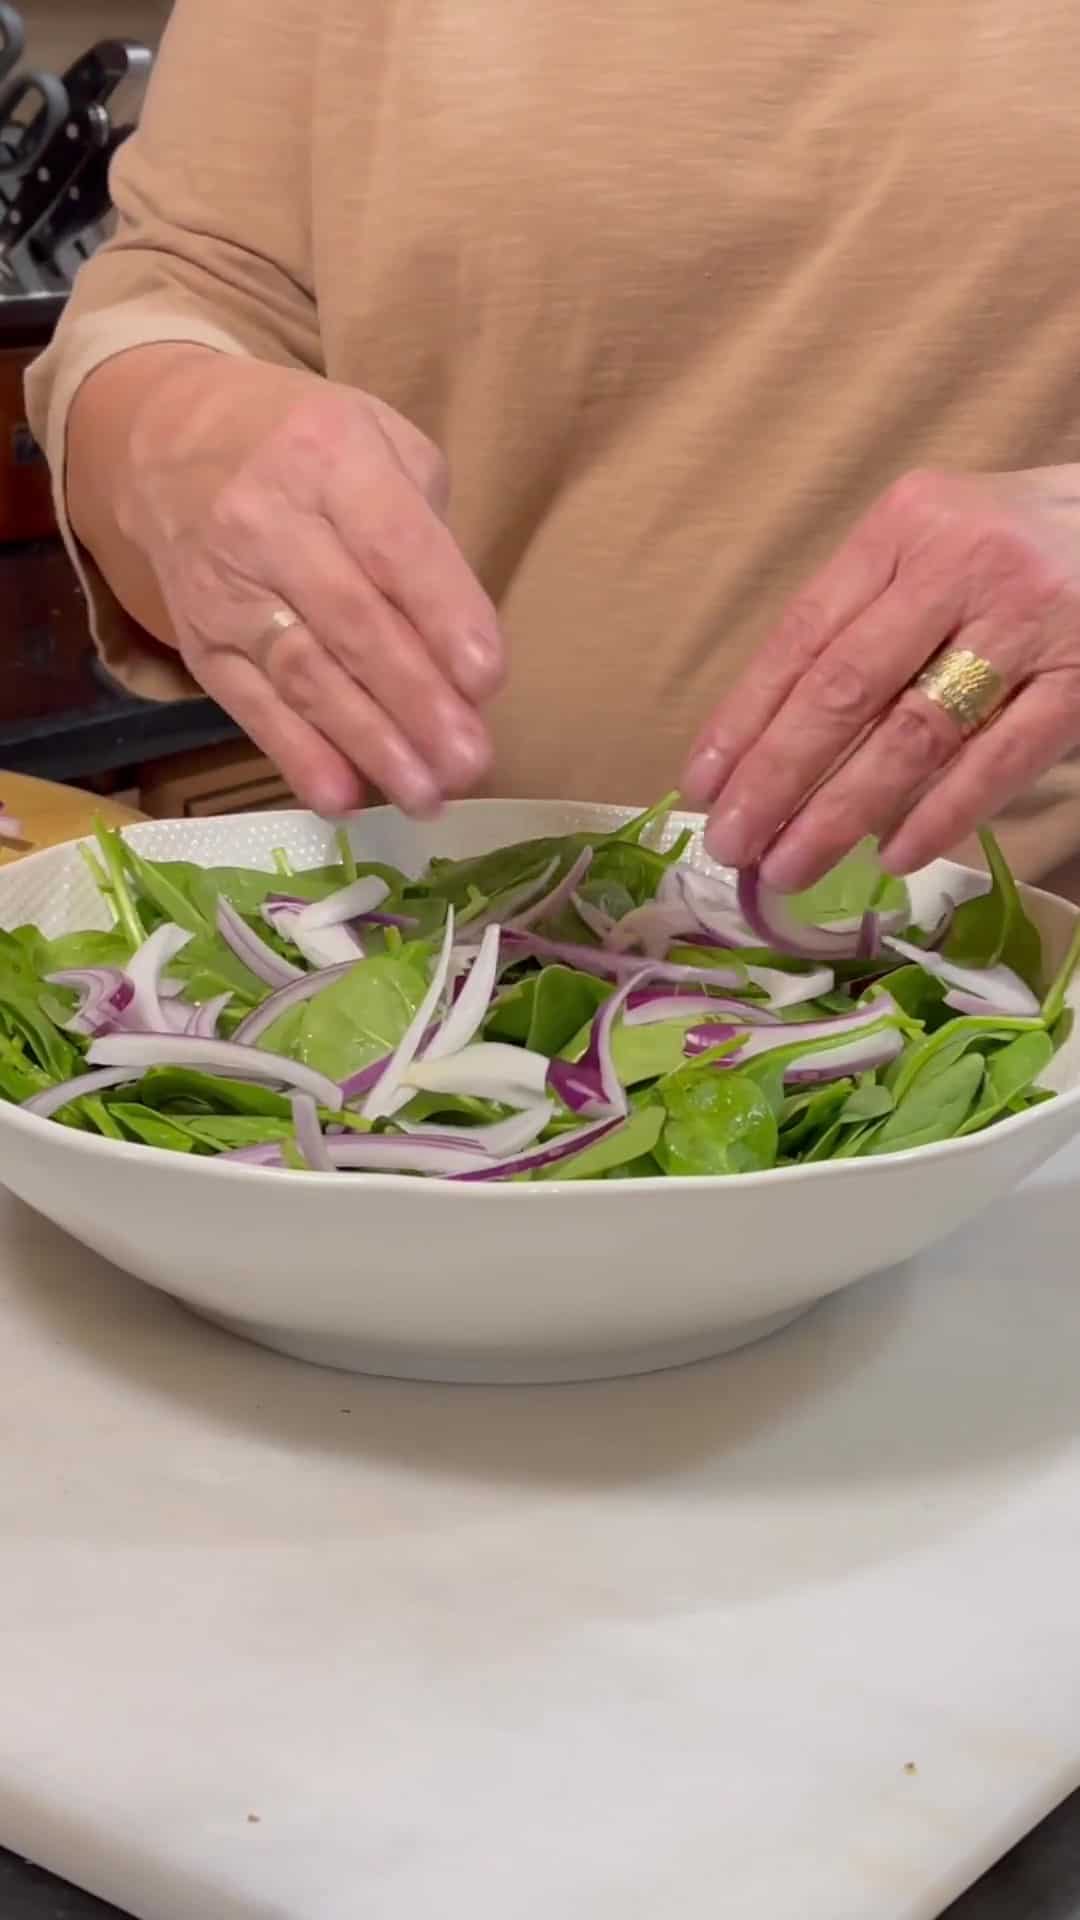 Red onion slices being placed onto a spinach salad.